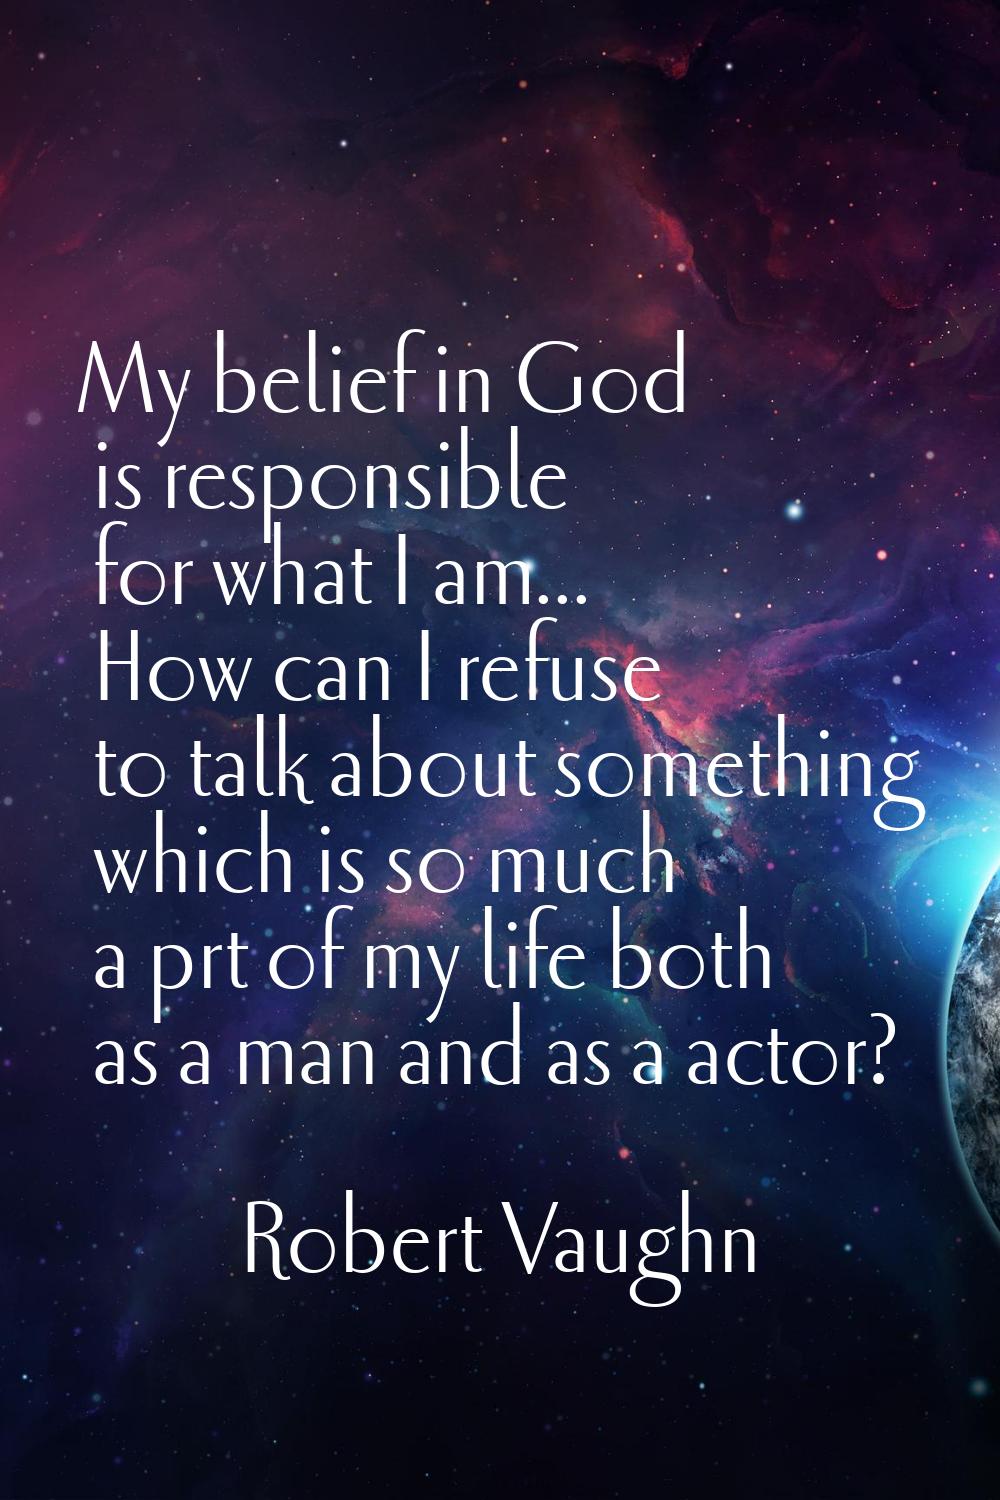 My belief in God is responsible for what I am... How can I refuse to talk about something which is 